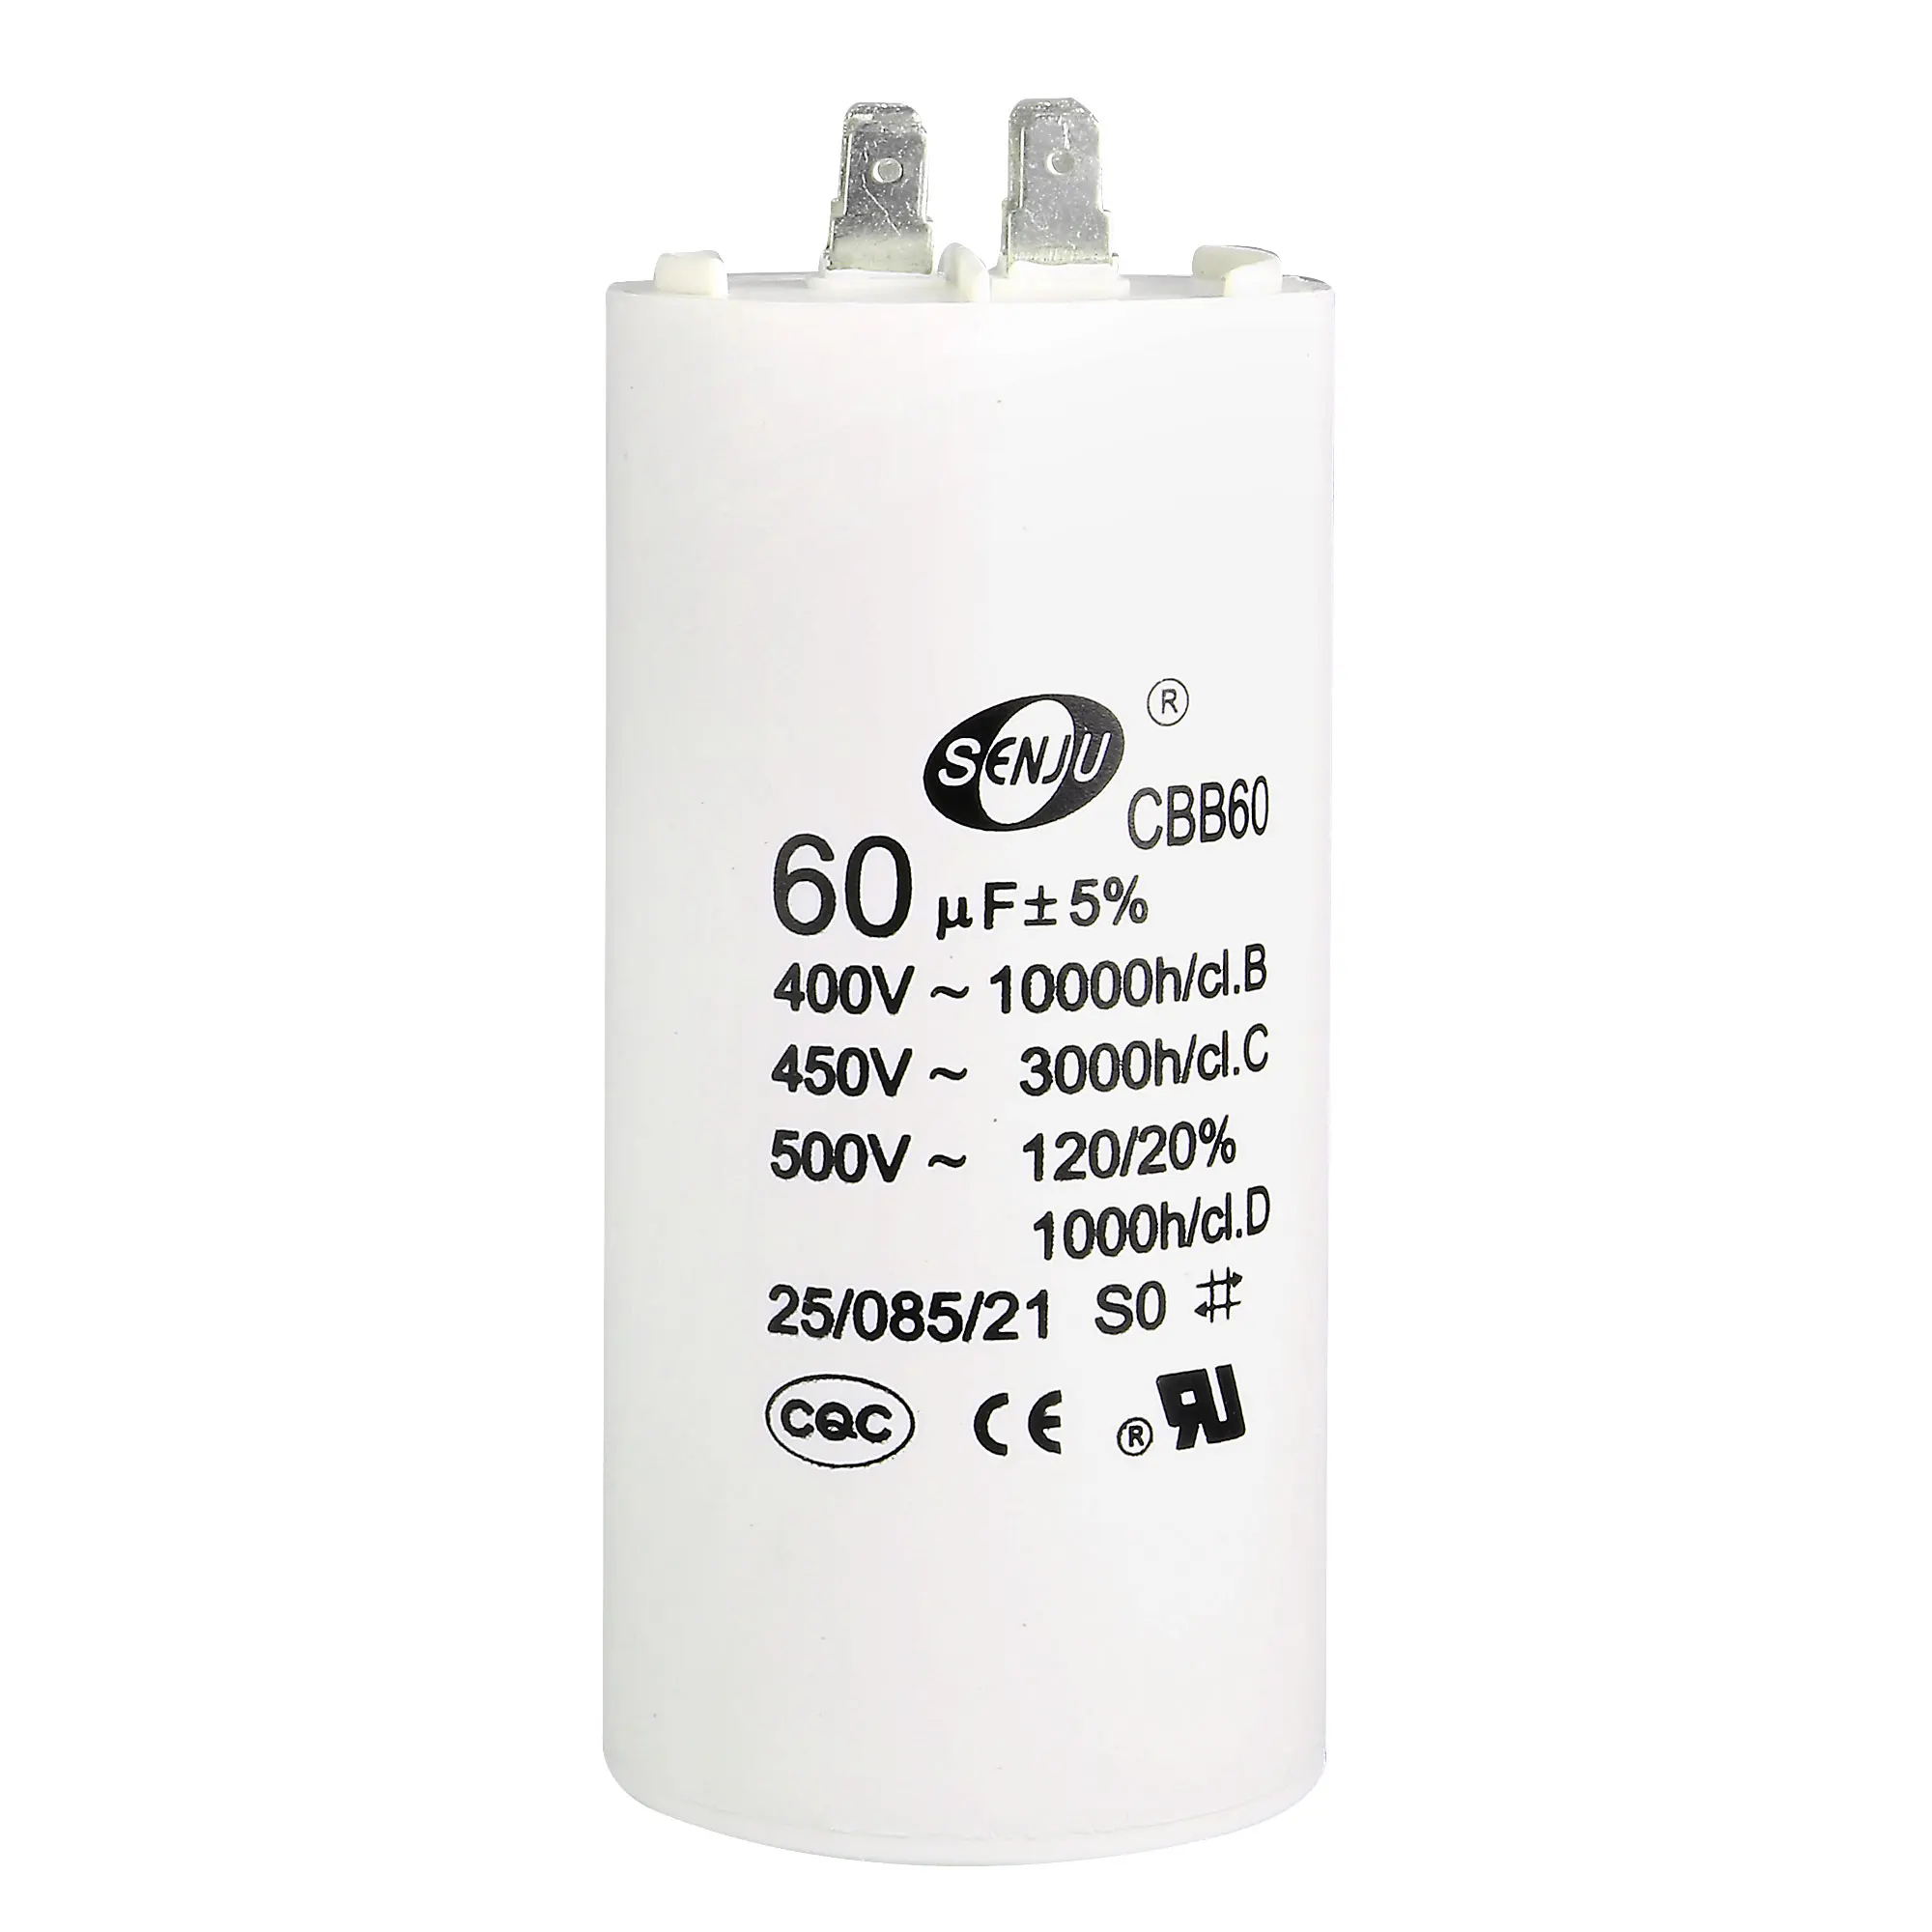 uxcell CBB60 Run Capacitor 60uF 450V AC Double Insert 50/60Hz Cylinder 94x49mm White for Air Compressor Water Pump Motor